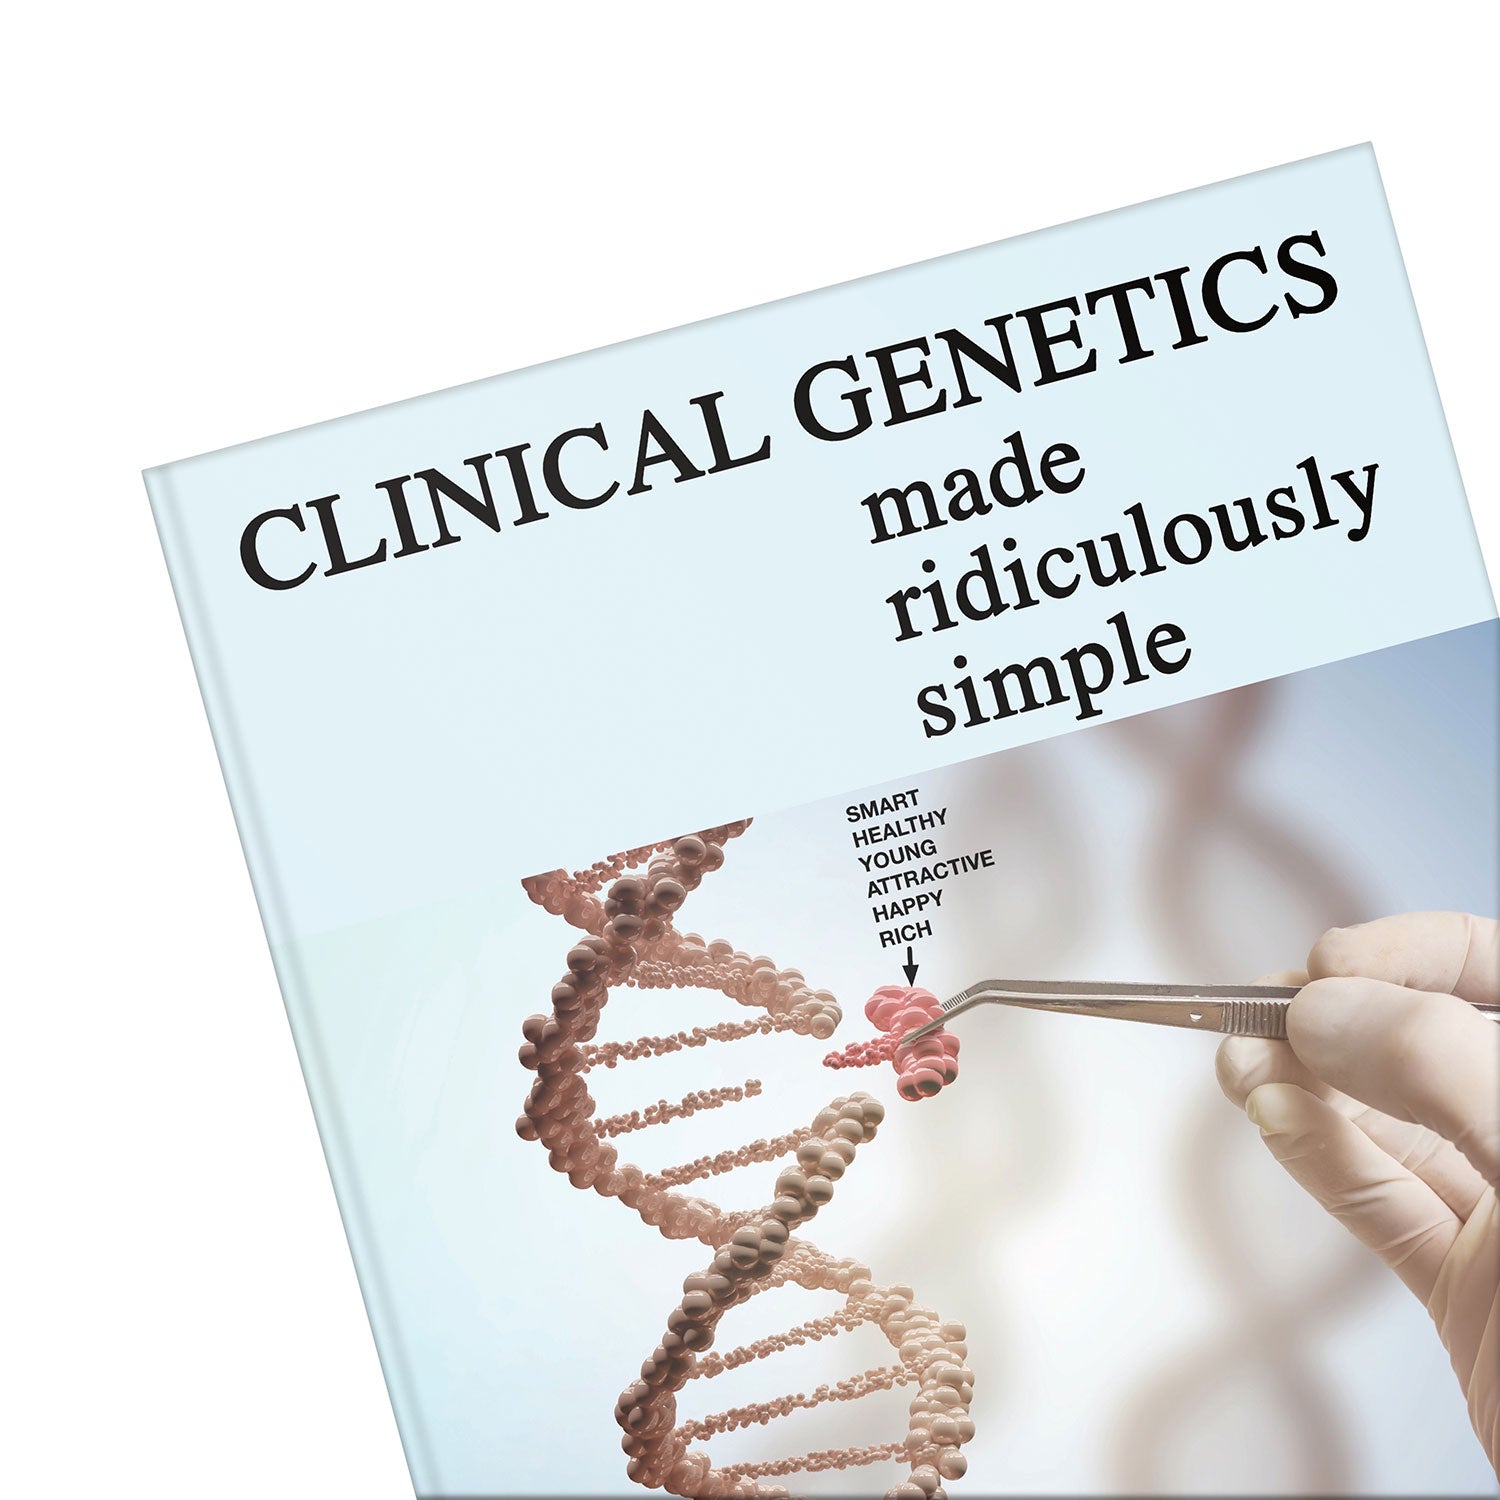 Clinical Genetics Made Ridiculously Simple